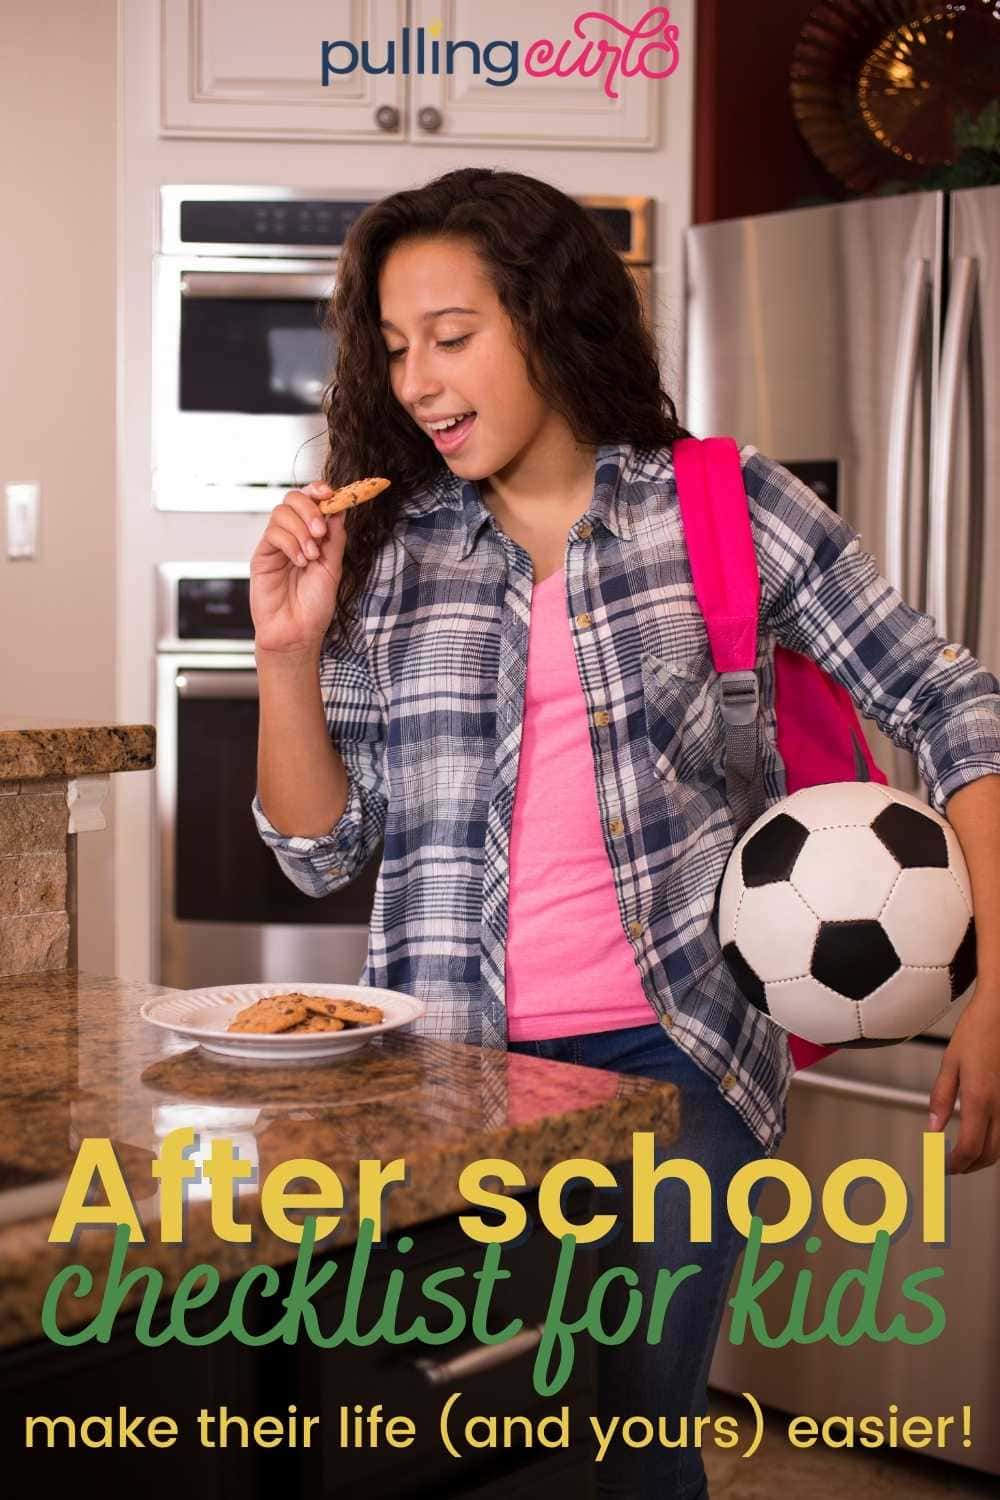 This perfect after school checklist will give your routine a template to make each day a little more organized (thereby making mornings easier too!). via @pullingcurls